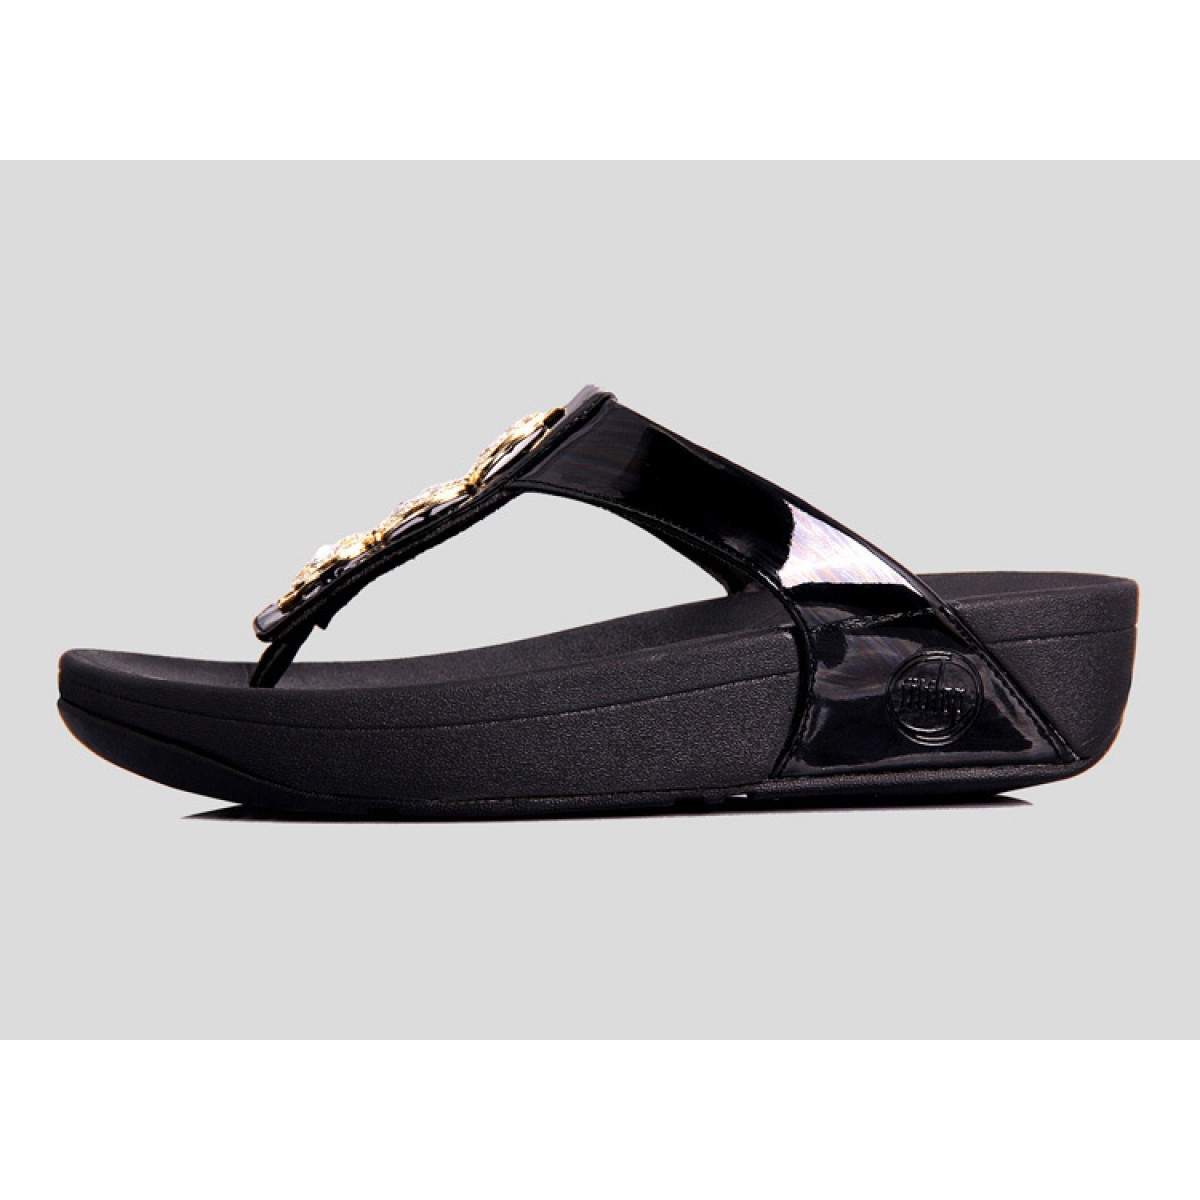 2016 New Fitflop Womens Sandals Black